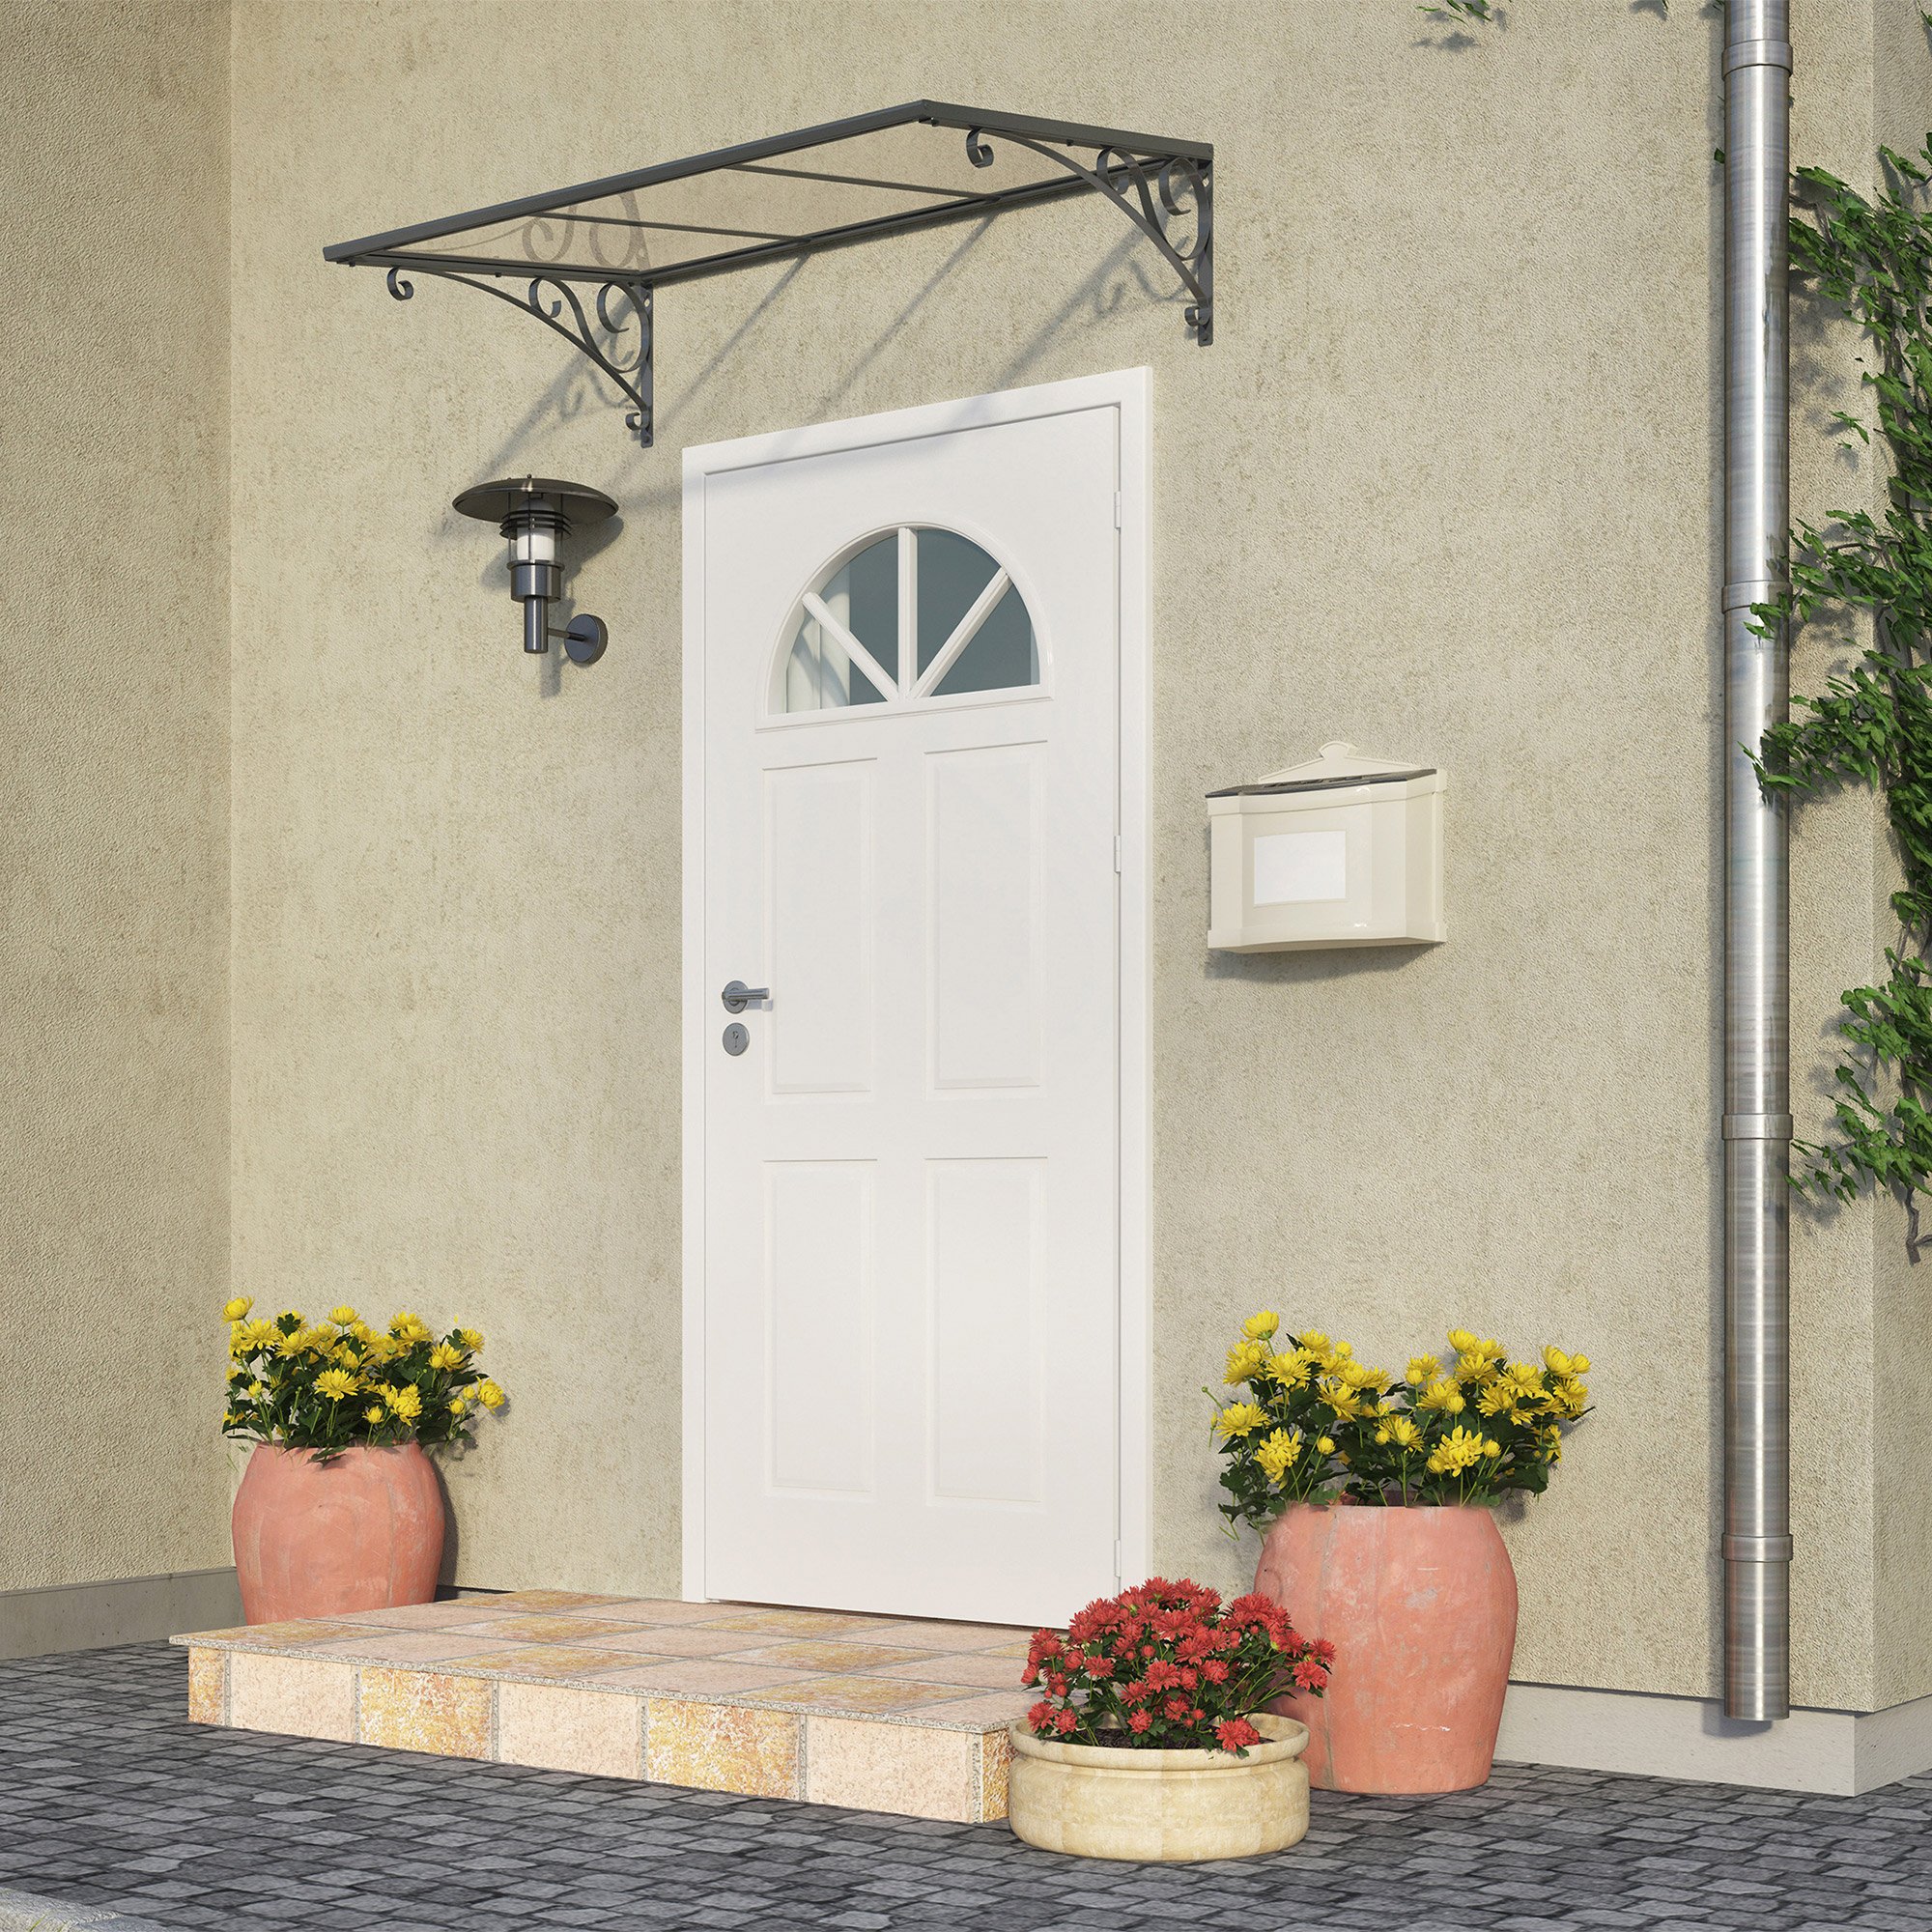 Product photograph of Palram Canopia Venus 1350 Clear Canopy Rain Protector Entryway Door Cover from Buy Sheds Direct